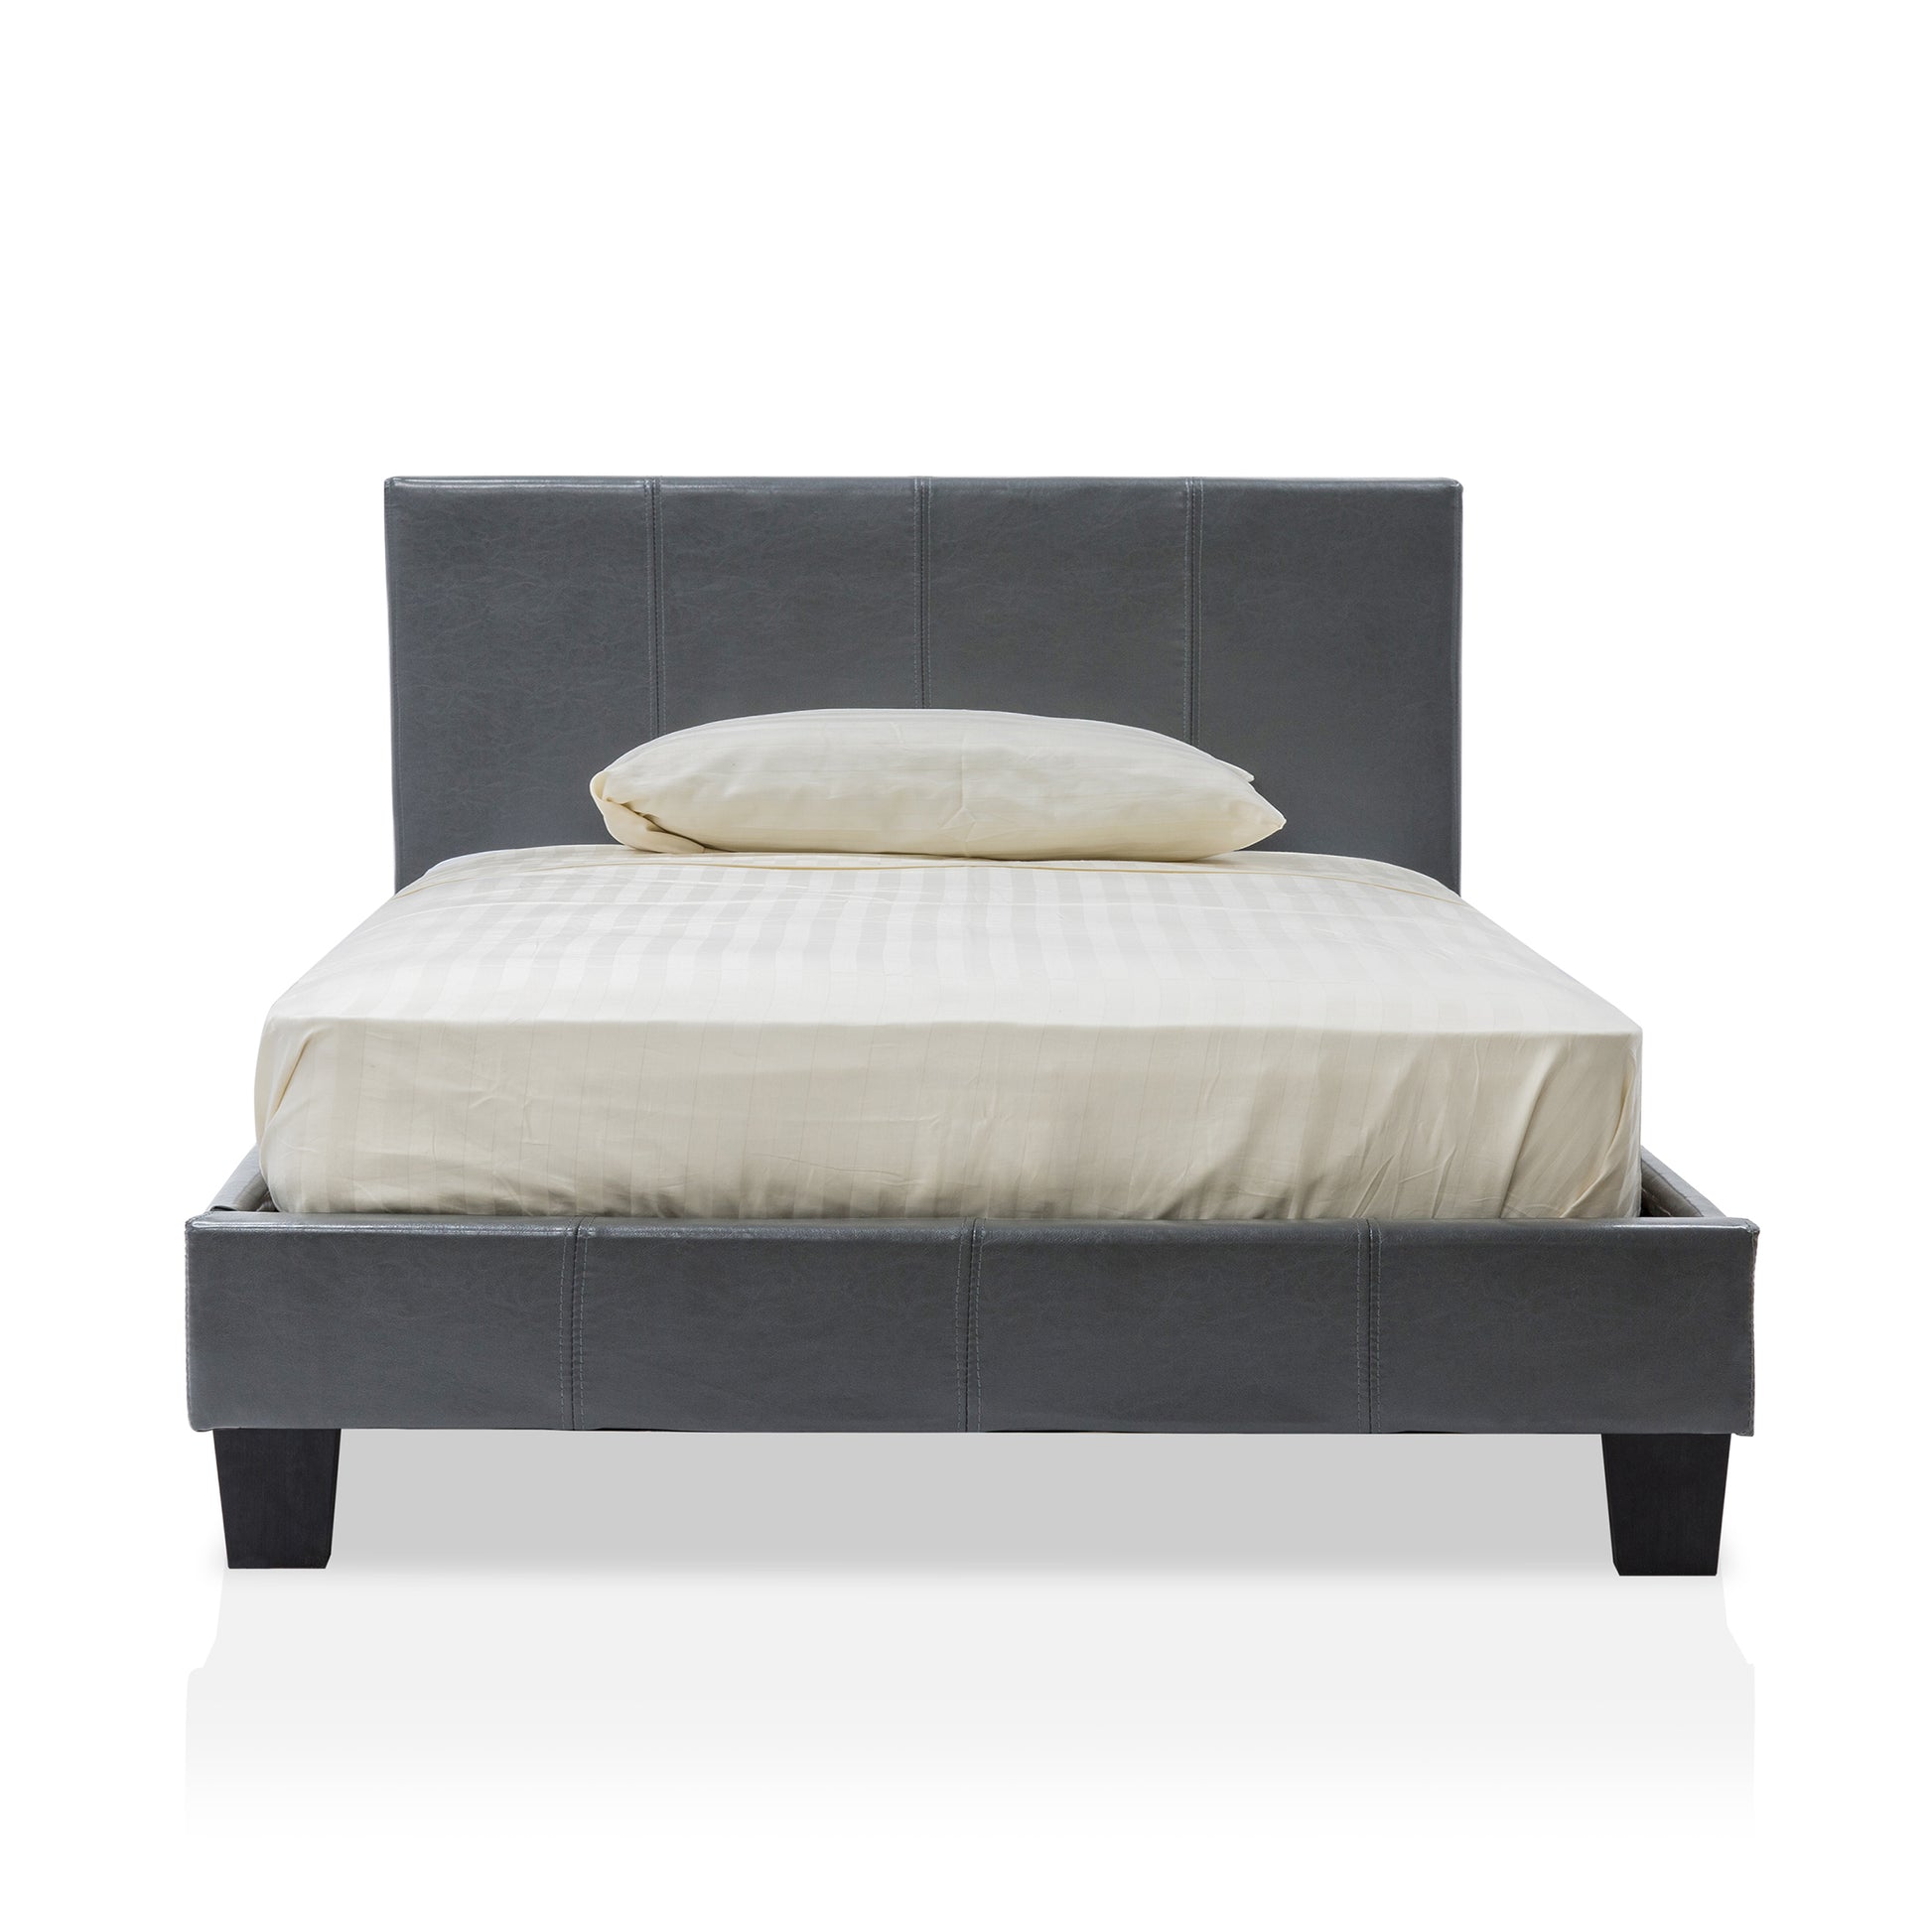 Front-facing contemporary gray faux leather twin platform bed with linens on a white background